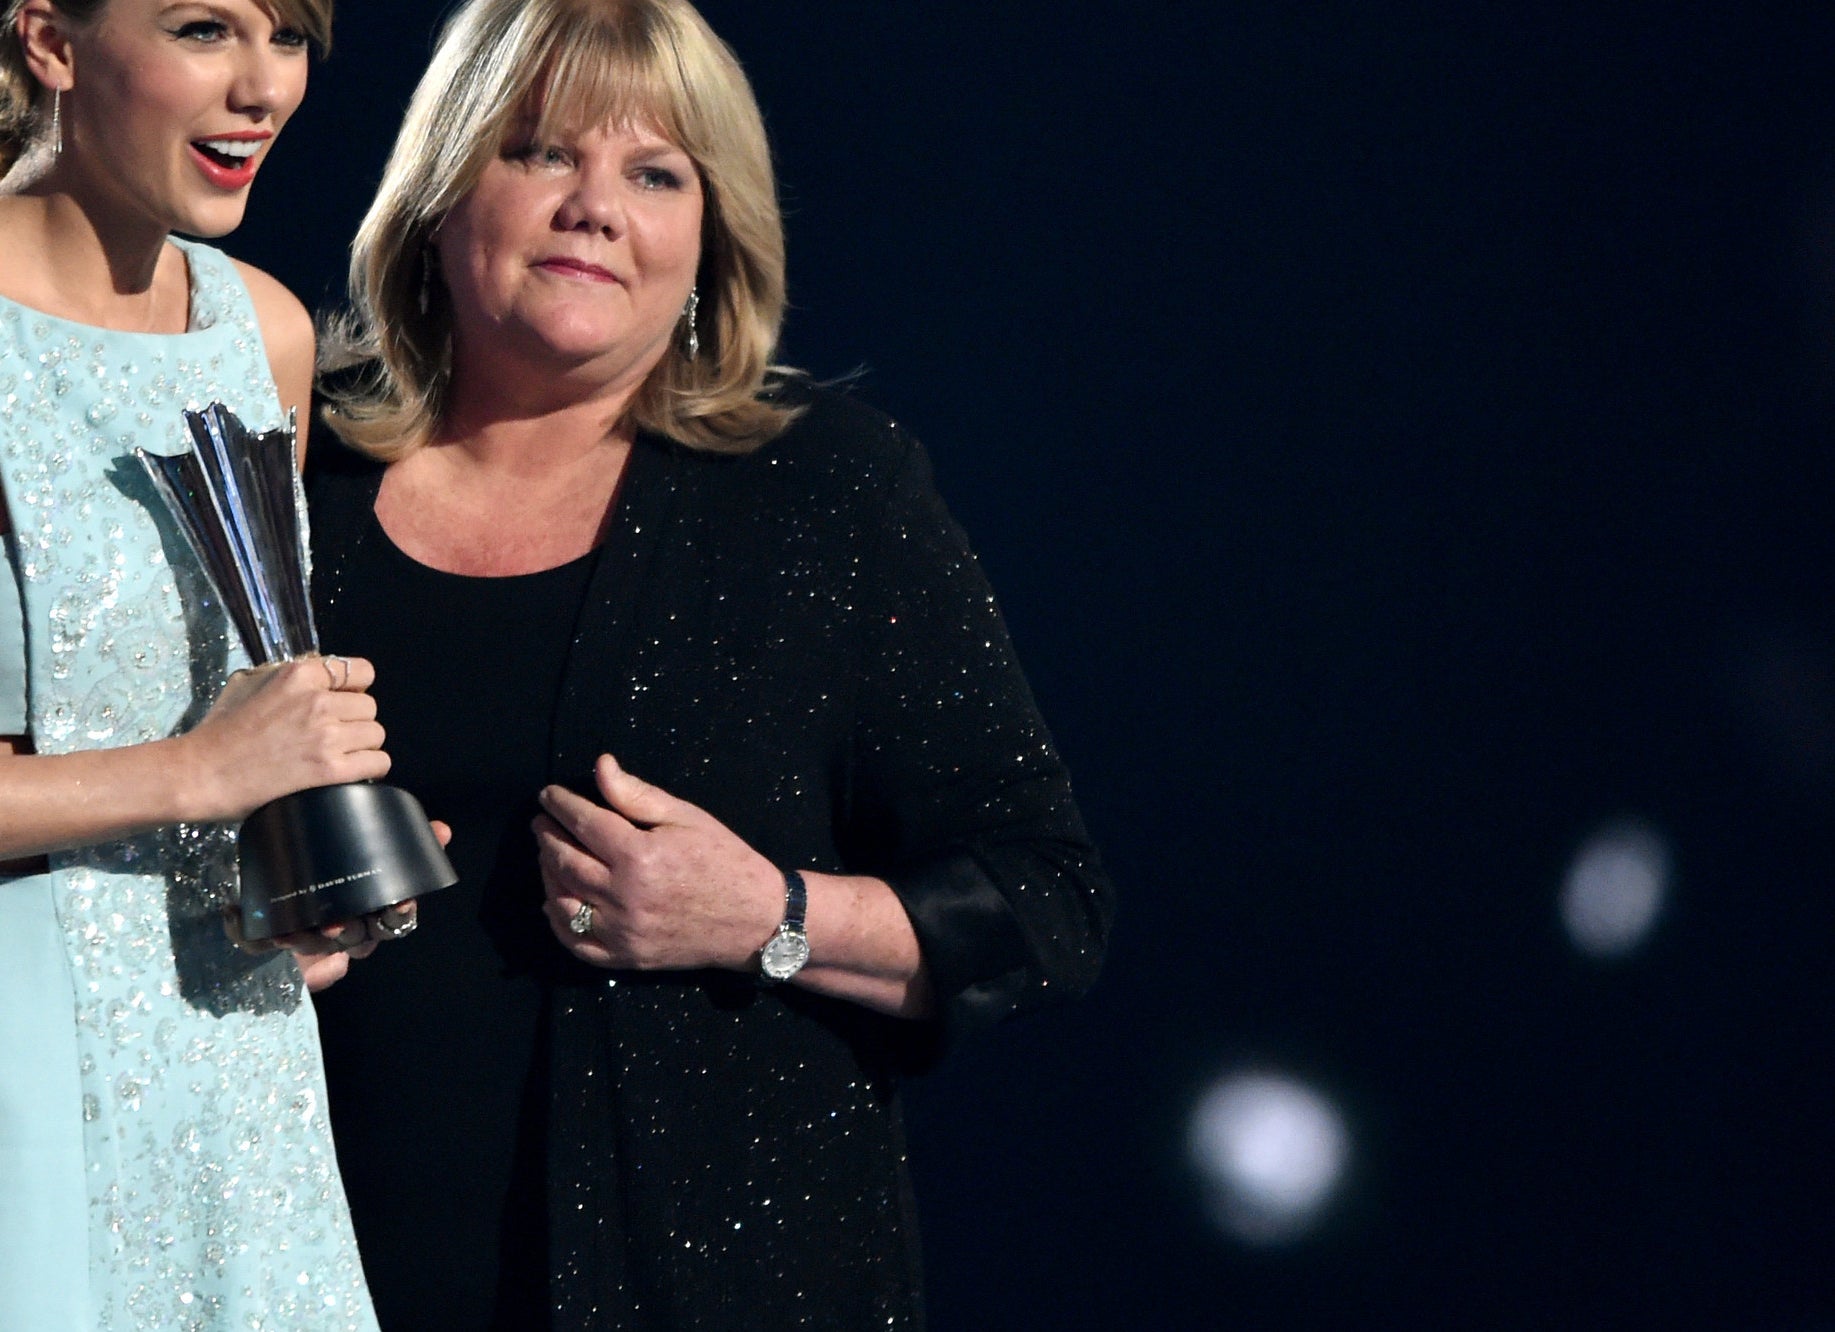 Taylor poses with her mom onstage